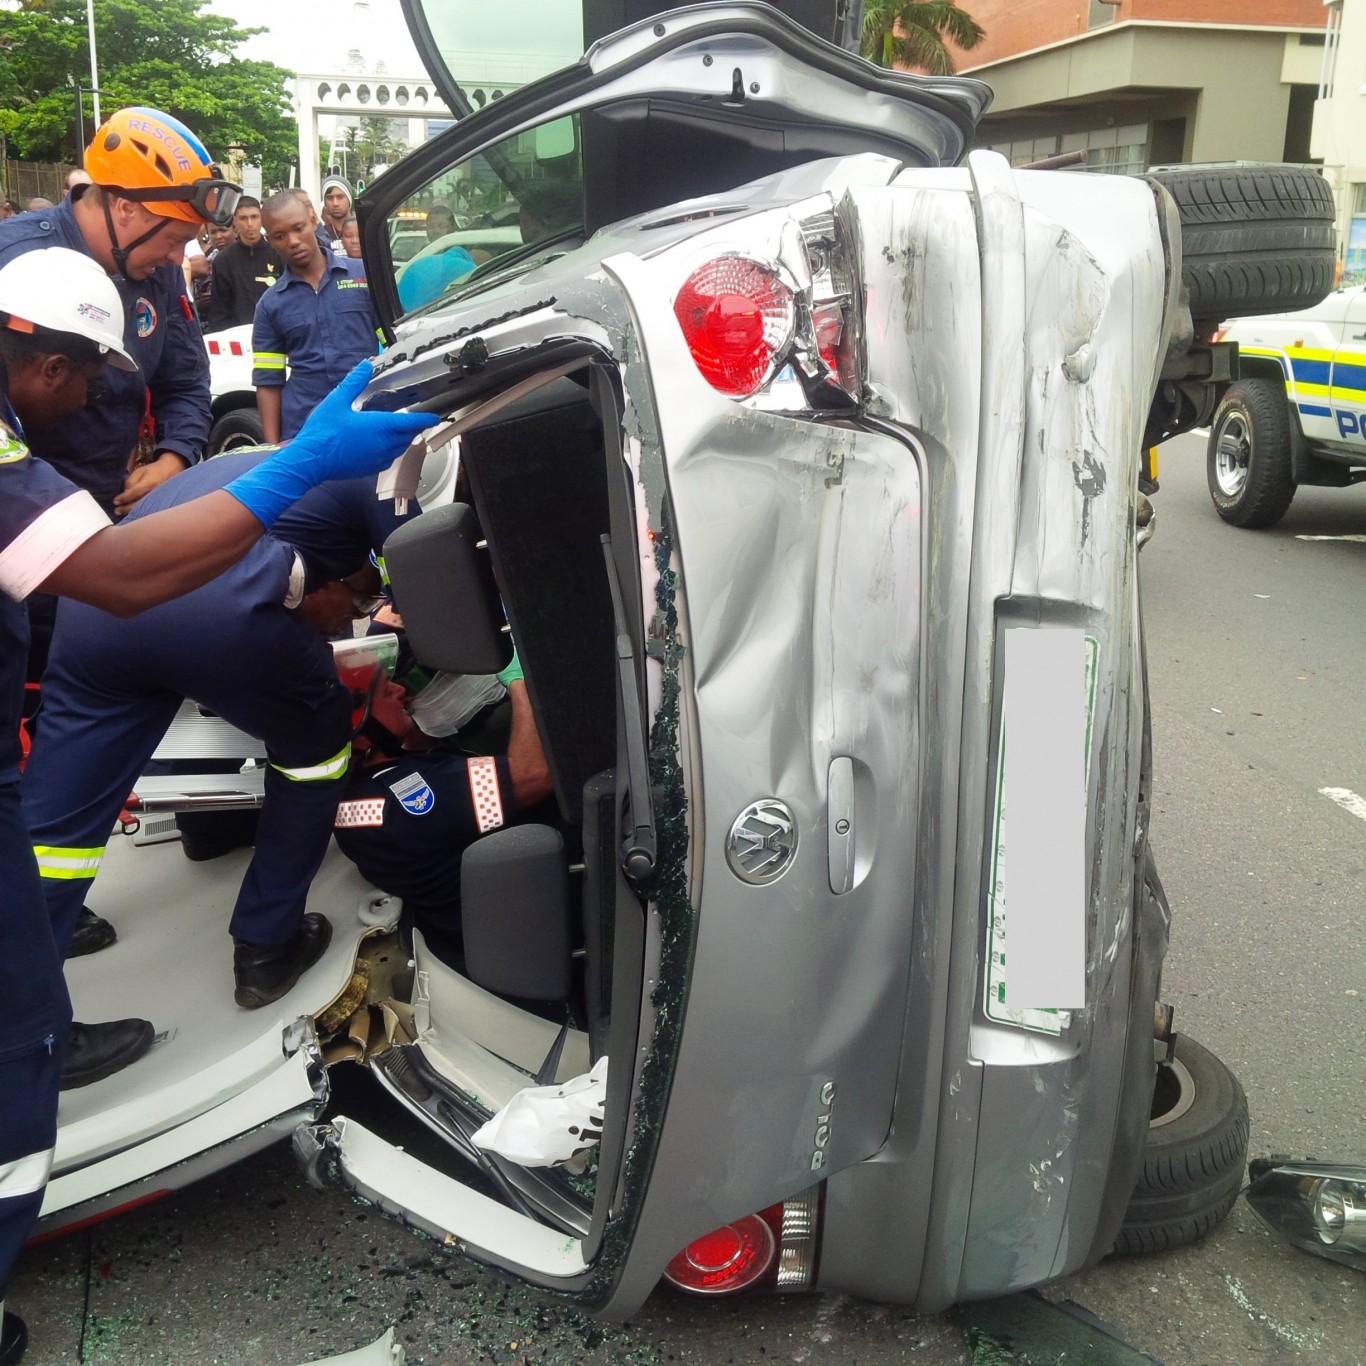 Greenside taxi collision leaves eight injured